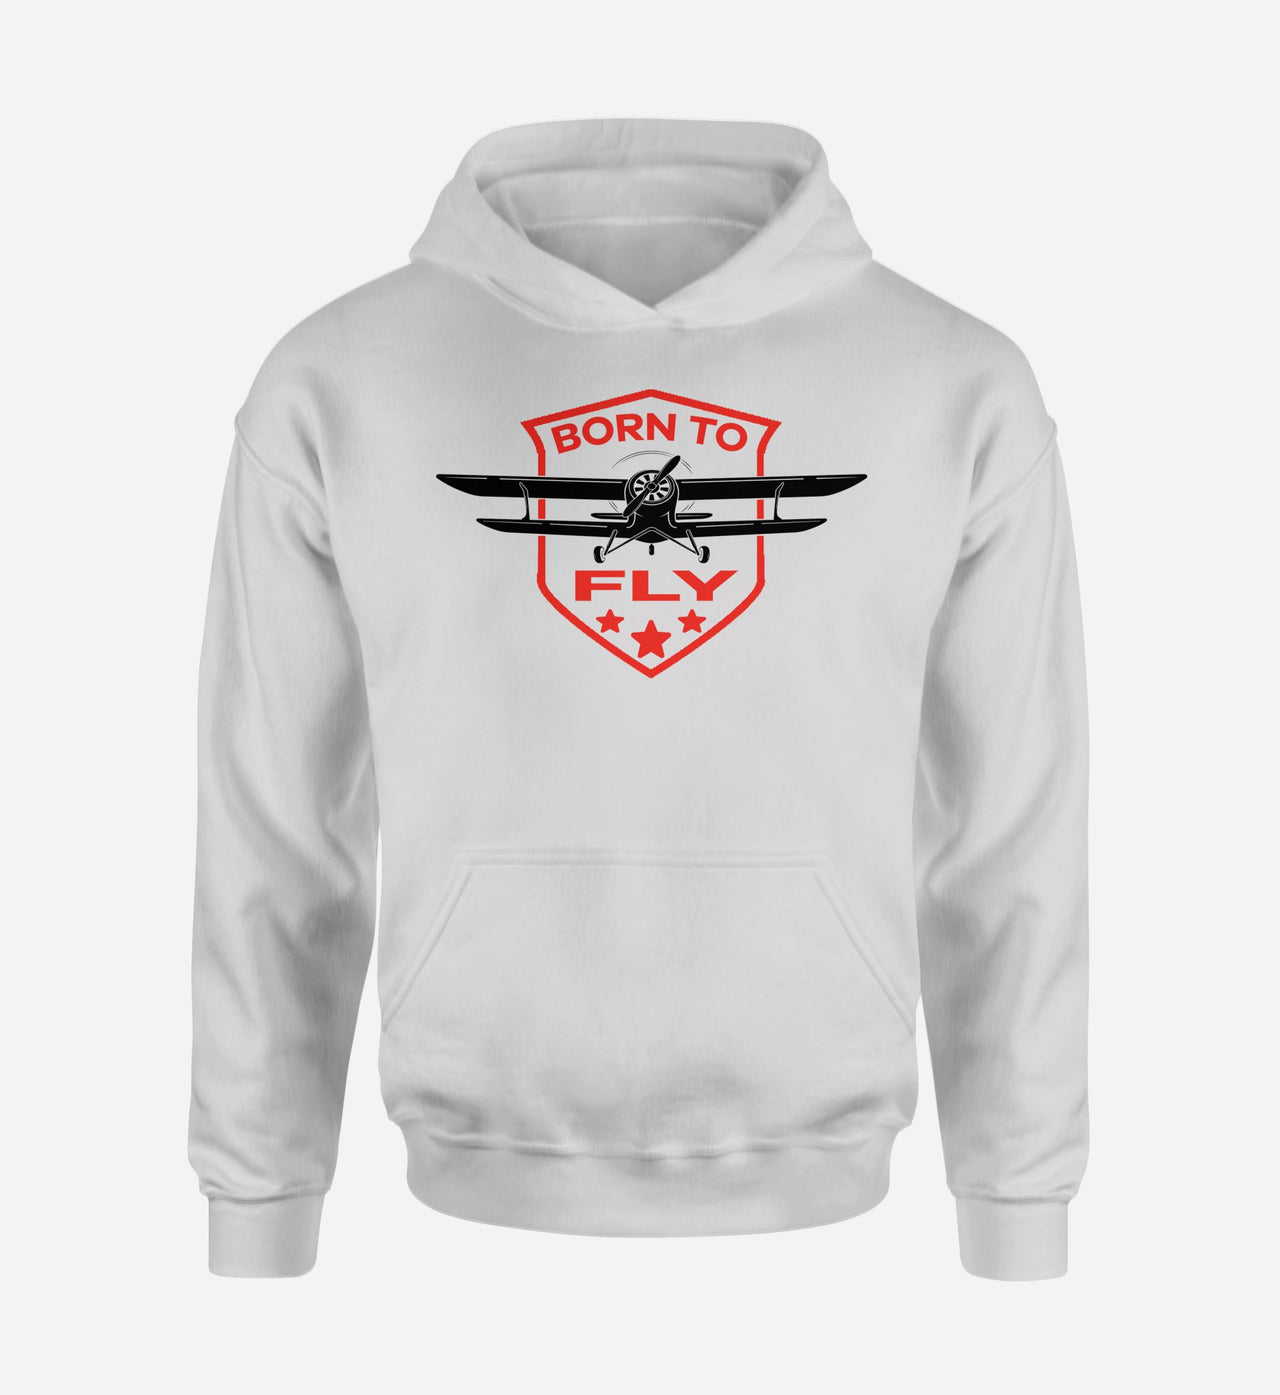 Super Born To Fly Designed Hoodies